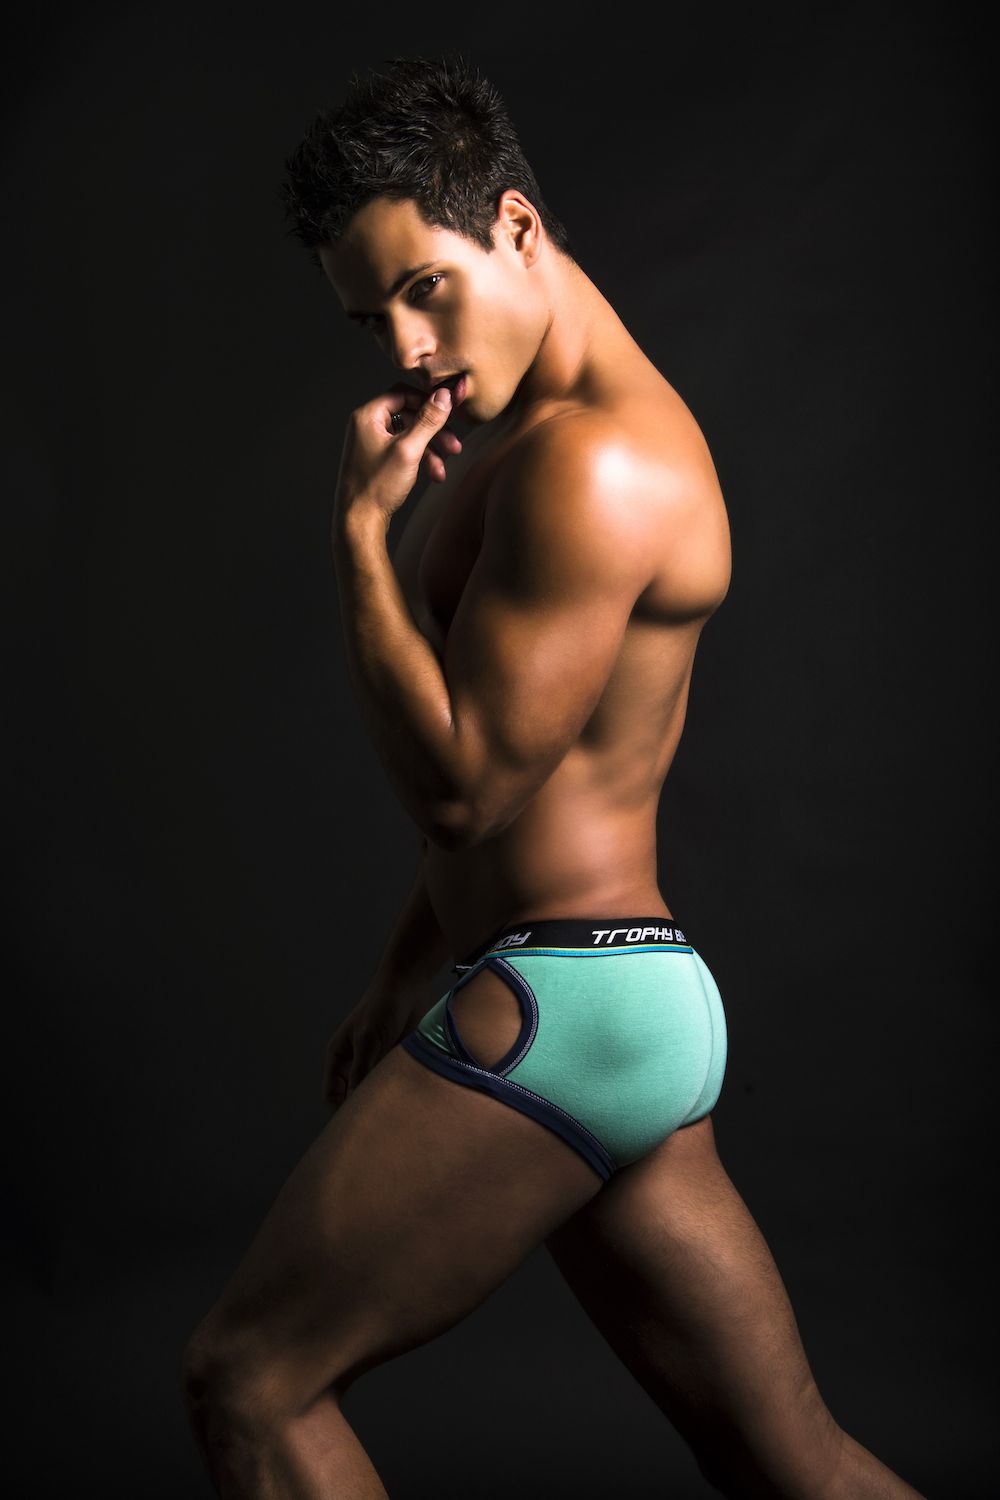 Andrew Christian Trophy Boy is a range of underwear designed for the well-e...